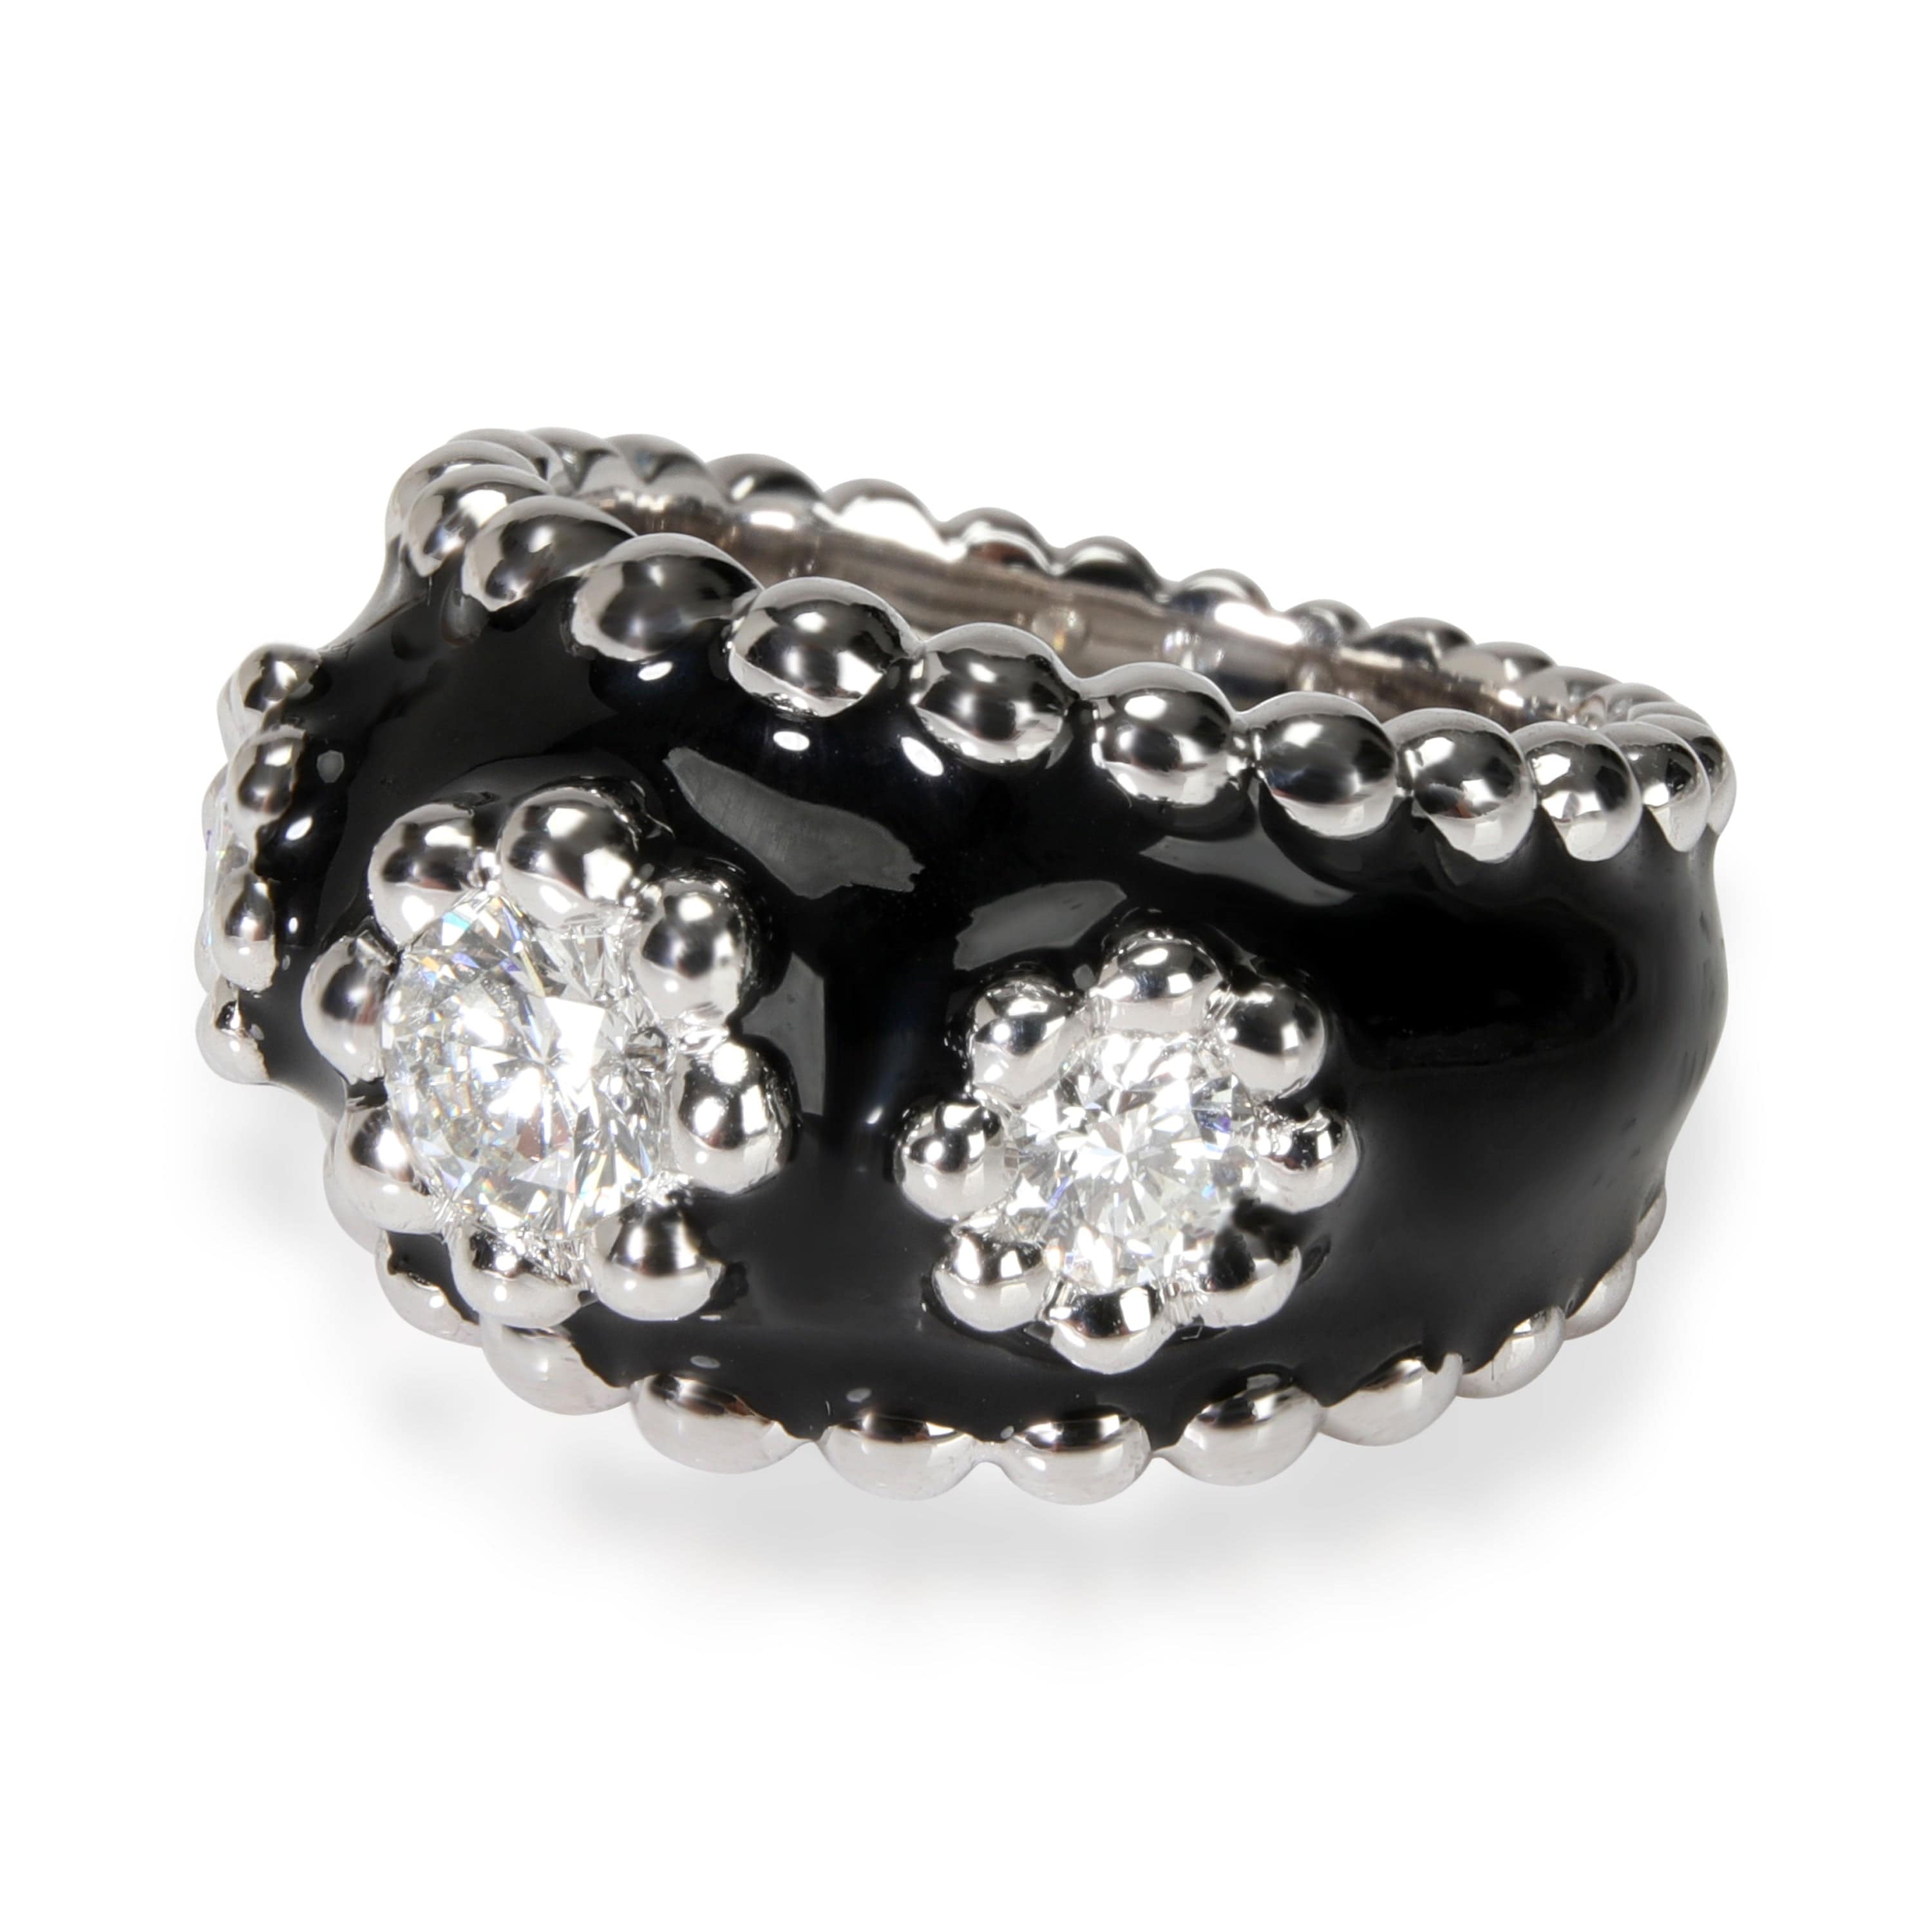 Chanel Vintage Chanel Diamond & Enamel Cocktail Ring in 18kt White Gold 0.9 CTW